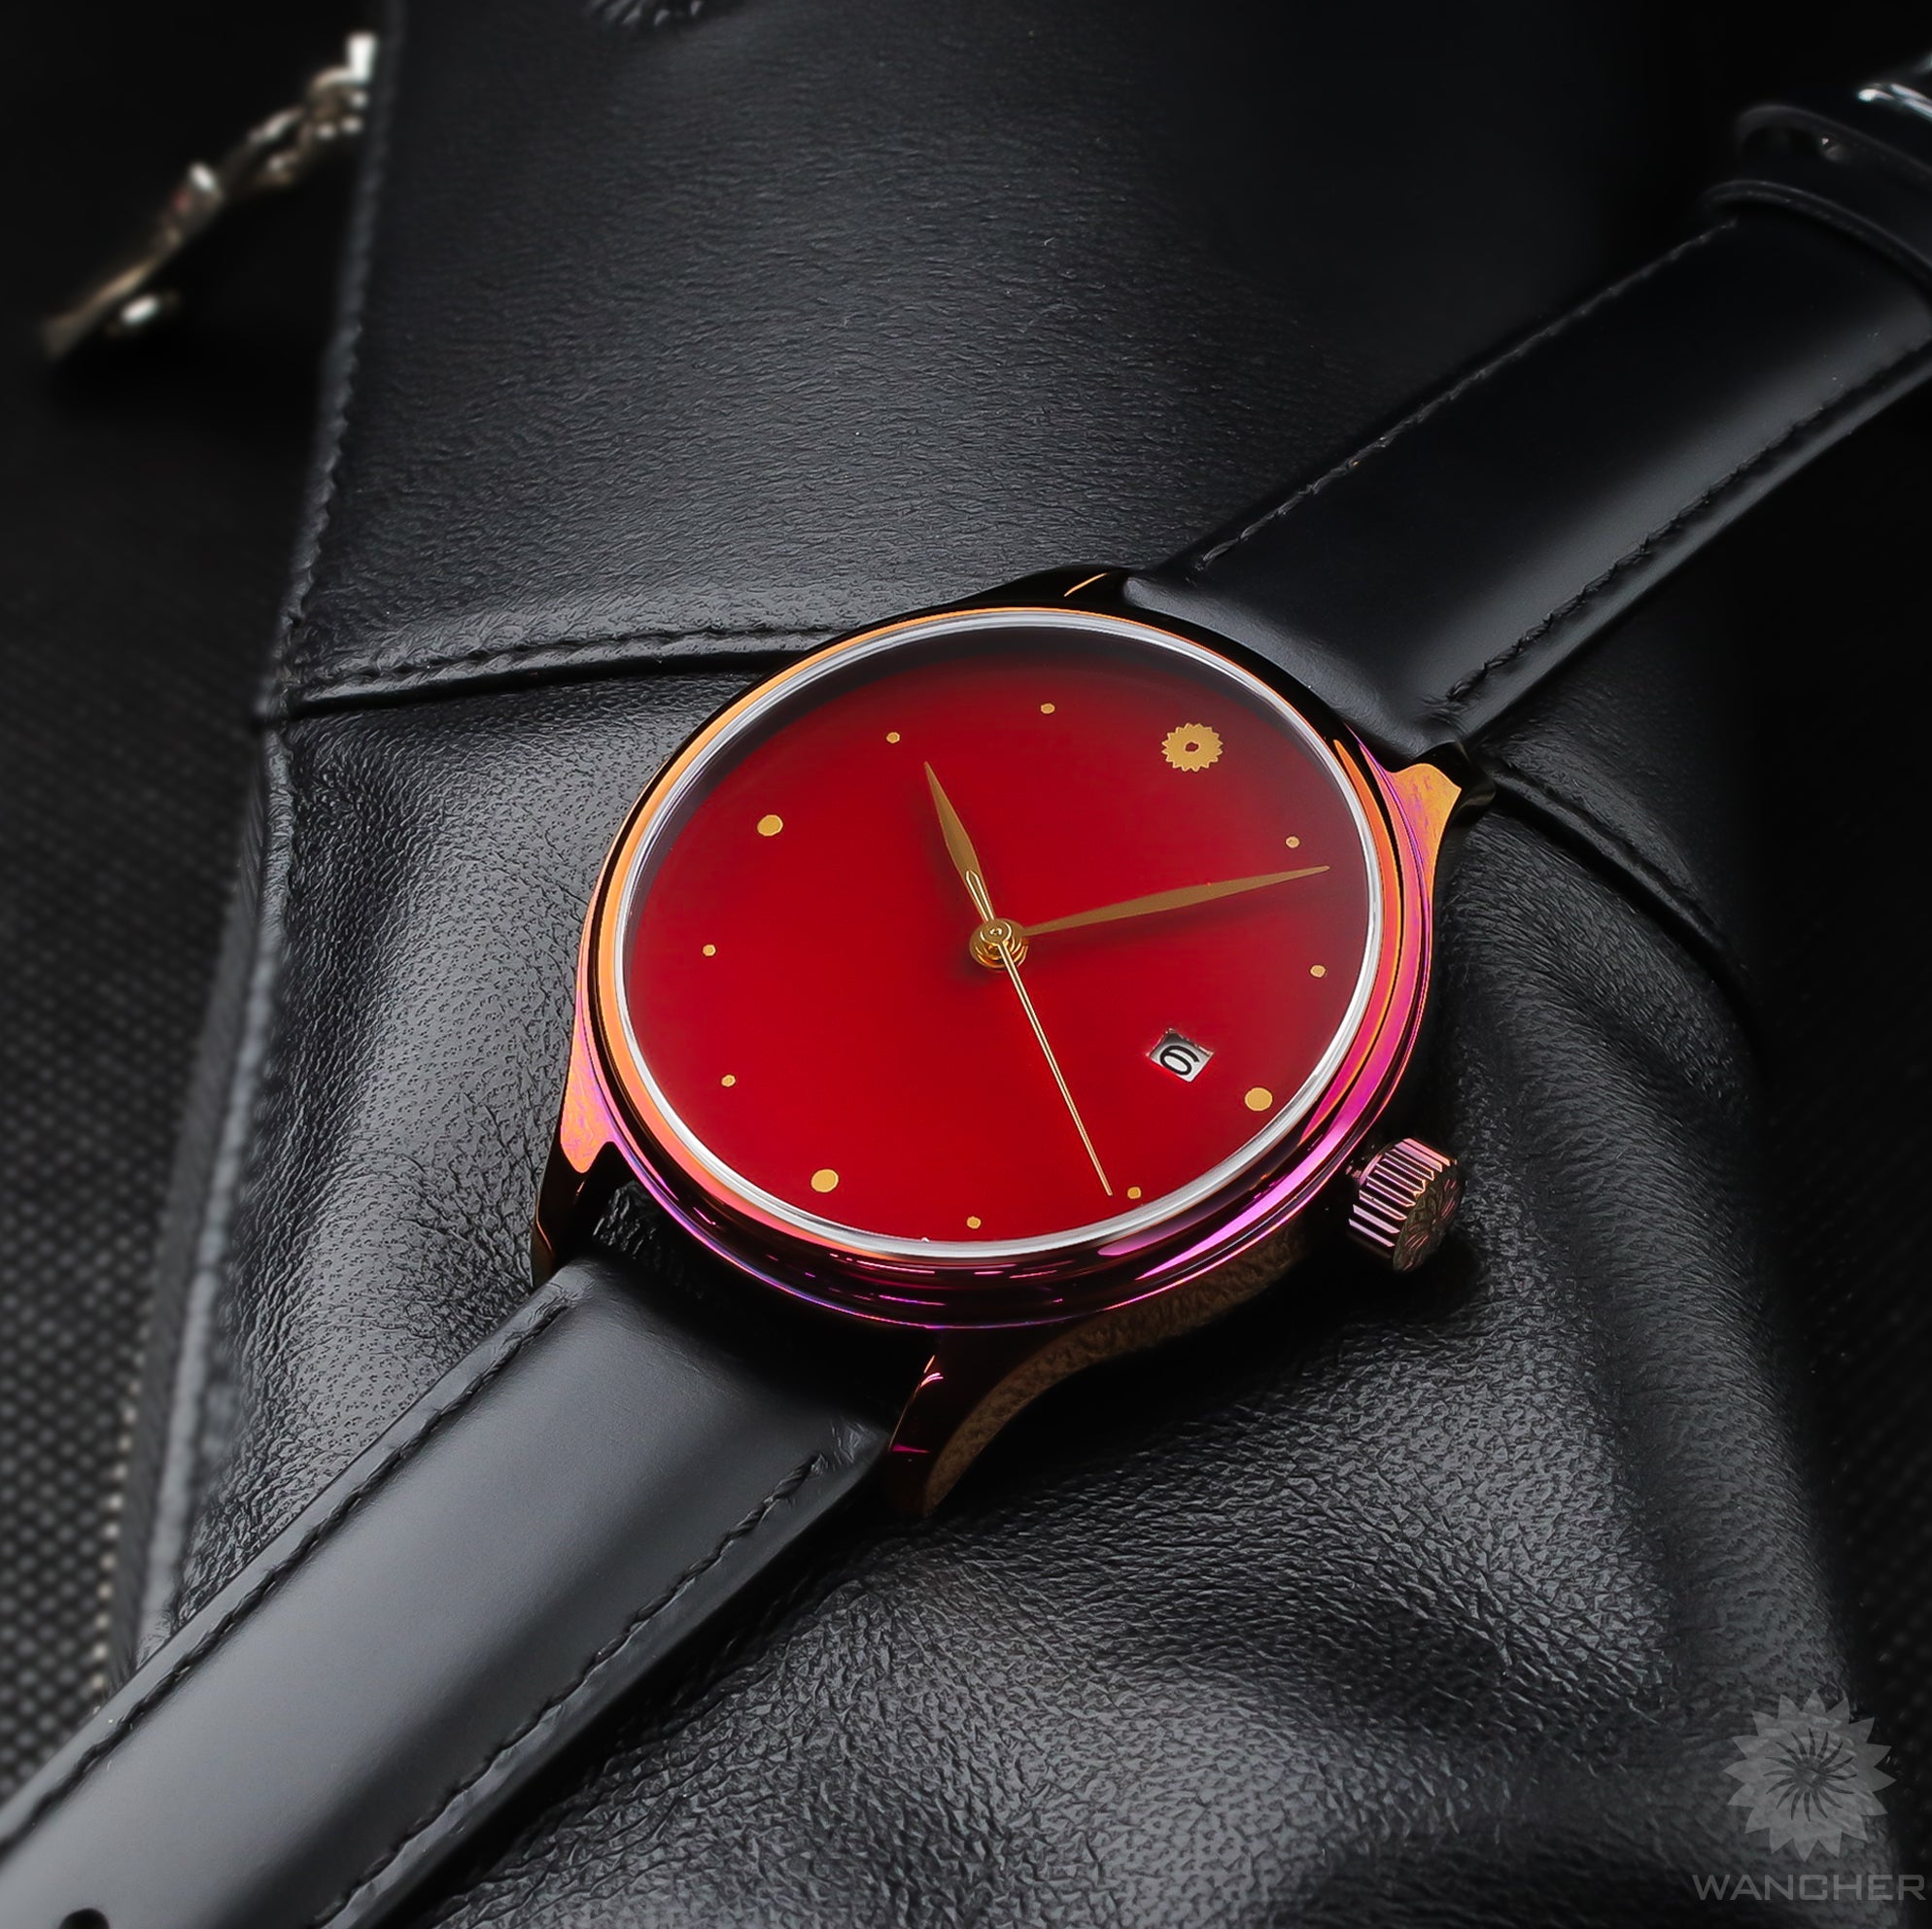 Dream Watch - Vermillion Red - Wancher Watch Wancher Watch Wancher Watch Dream Watch - Vermillion Red {{ Automatic Watch {{ Watch }} }} {{ Japan }} Image of Wancher Dream Watch with Vermillion Red Echizen Urushi Dial, Domed Sapphire Glass, and Genuine Cowhide/Galuchat strap. Powered by Miyota 9015 Mechanical Movement.